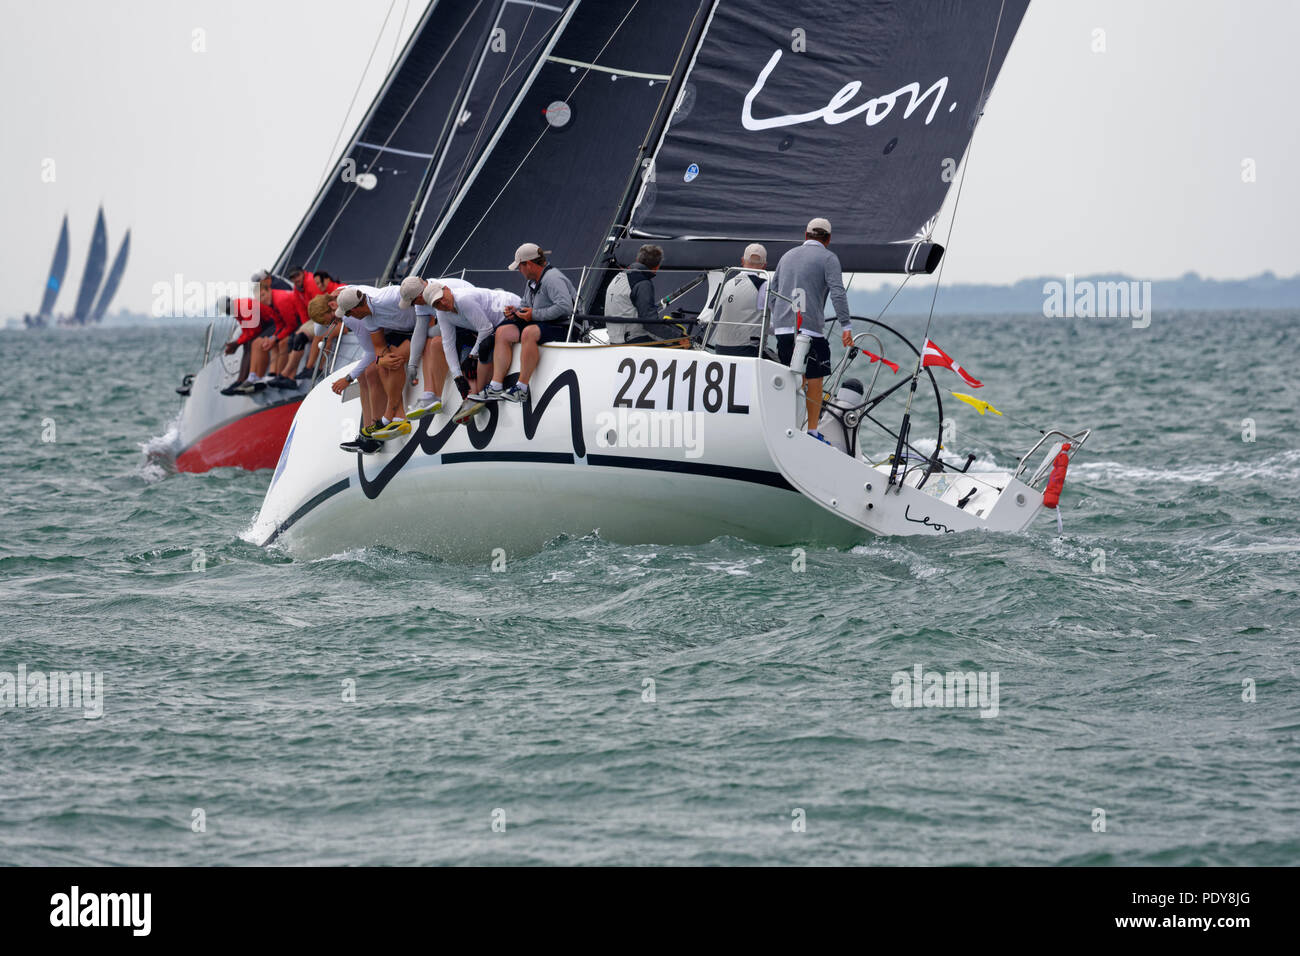 Sailing Yacht Leon racing on the Solent during Cowes Week Stock Photo